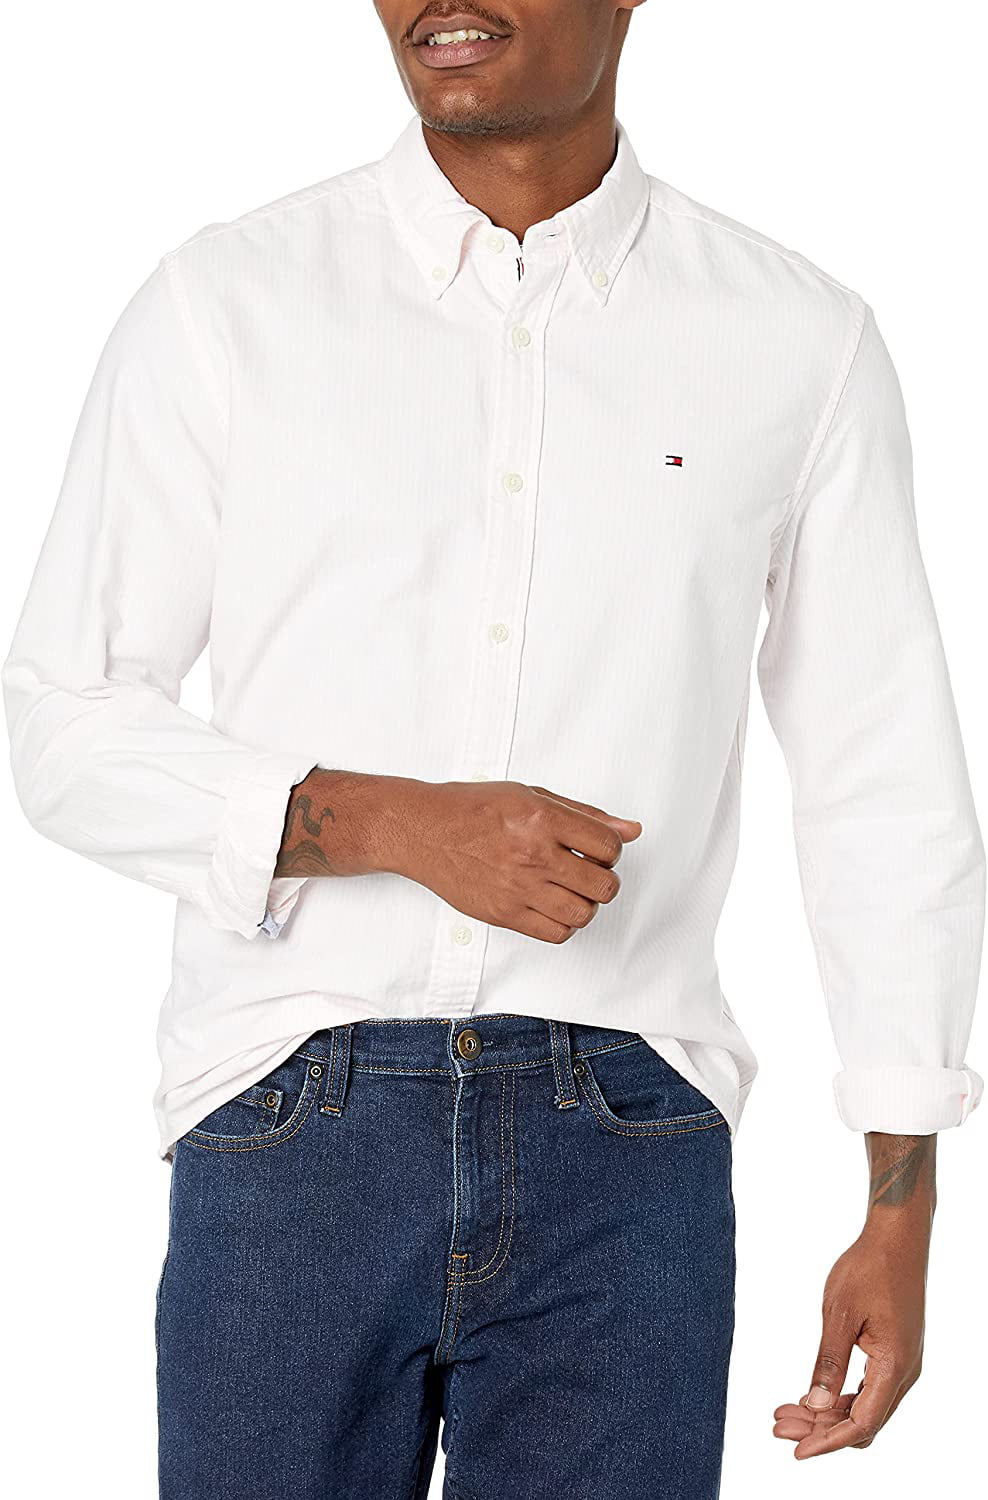 TOMMY JEANS OXFORD LONG SLEEVE SHIRT TOMMY HILFIGER SHIRT NAVY/WHITE/SKY 